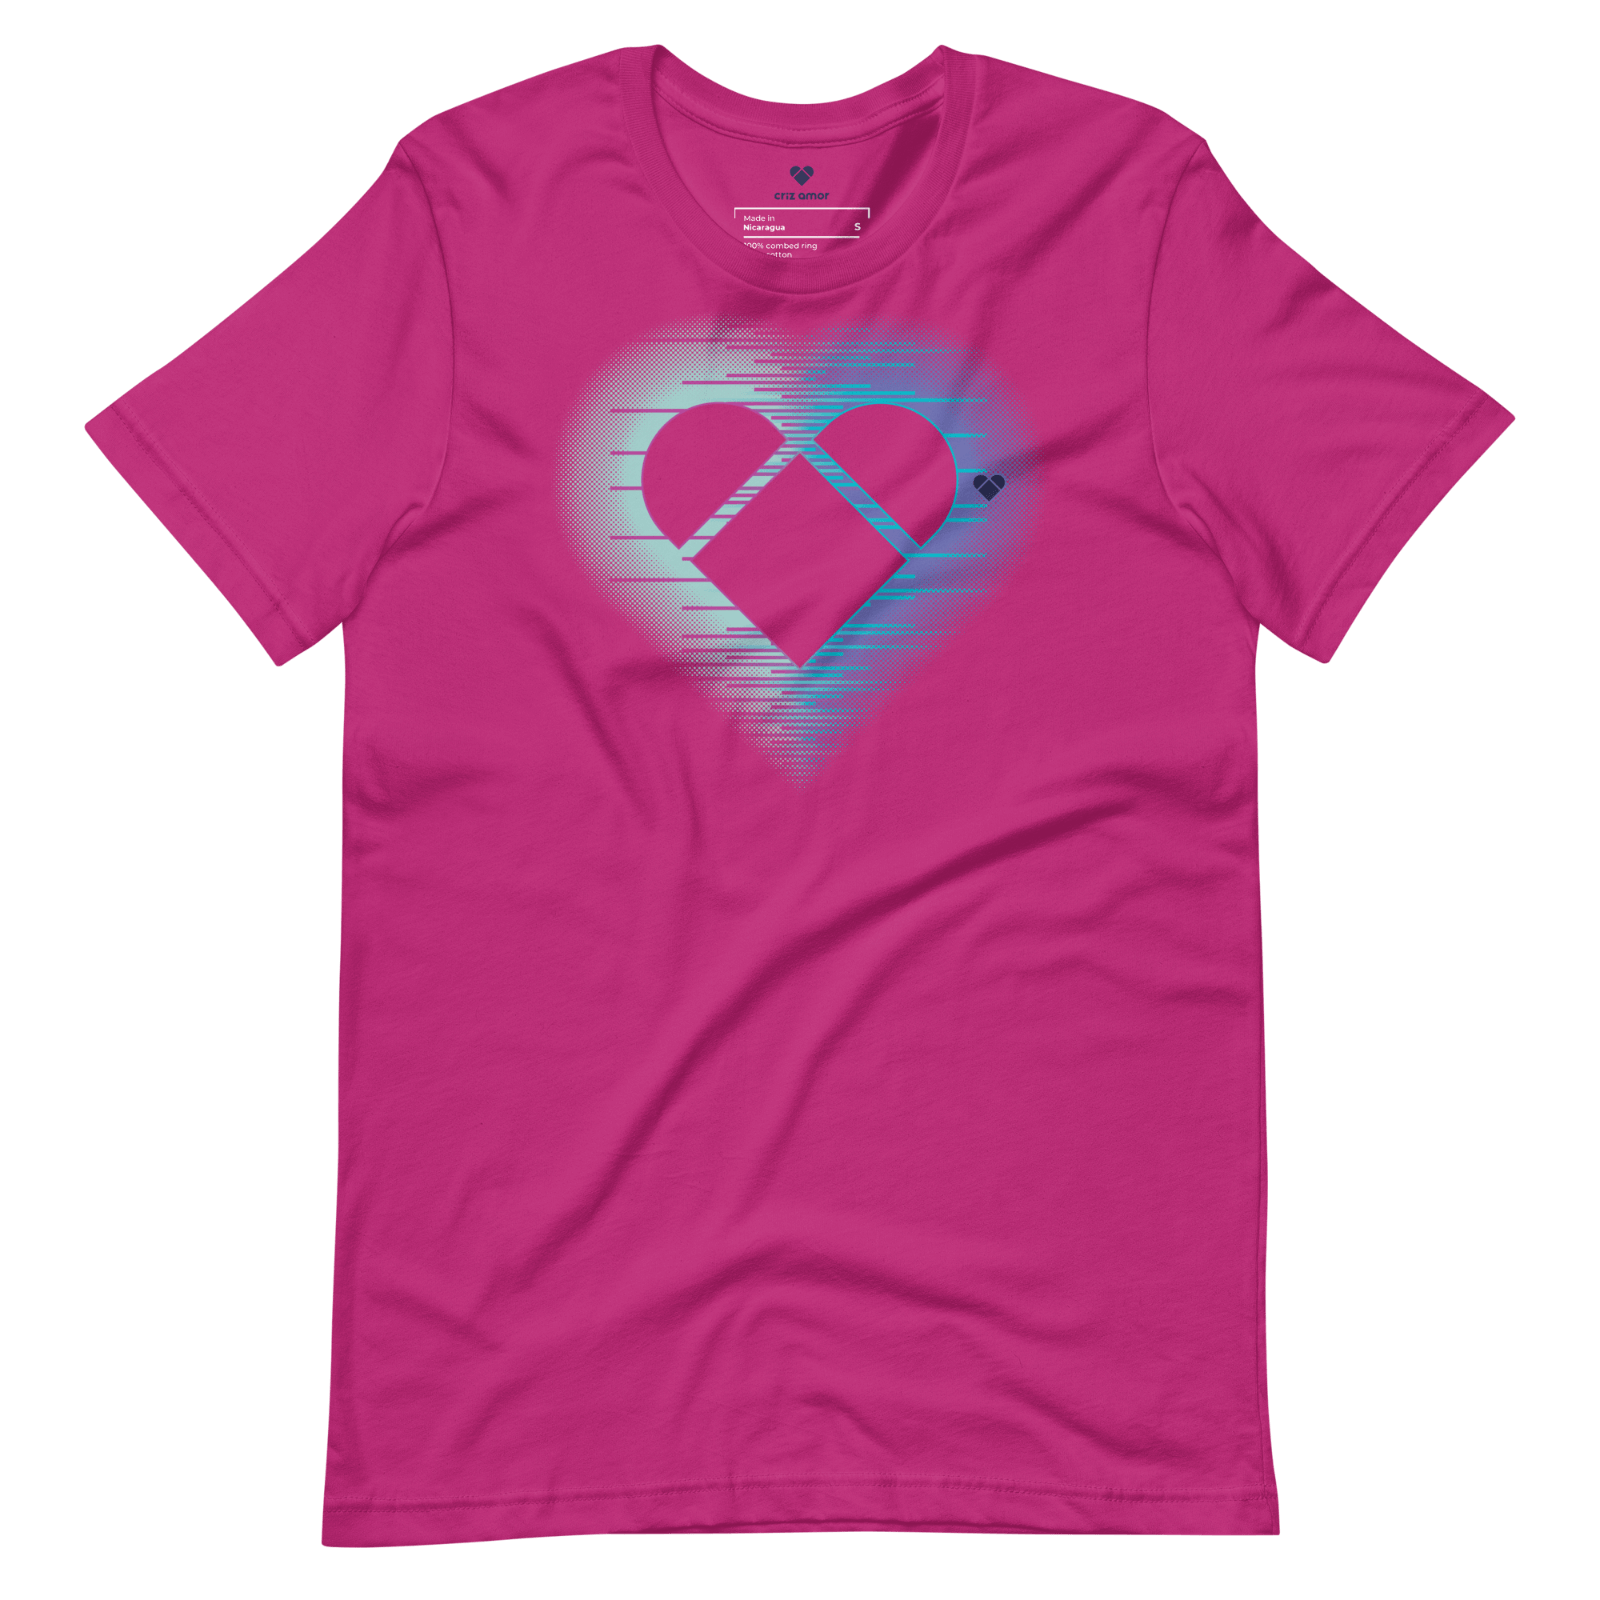 Versatile Pink Tee with Heart Logo for Every Day